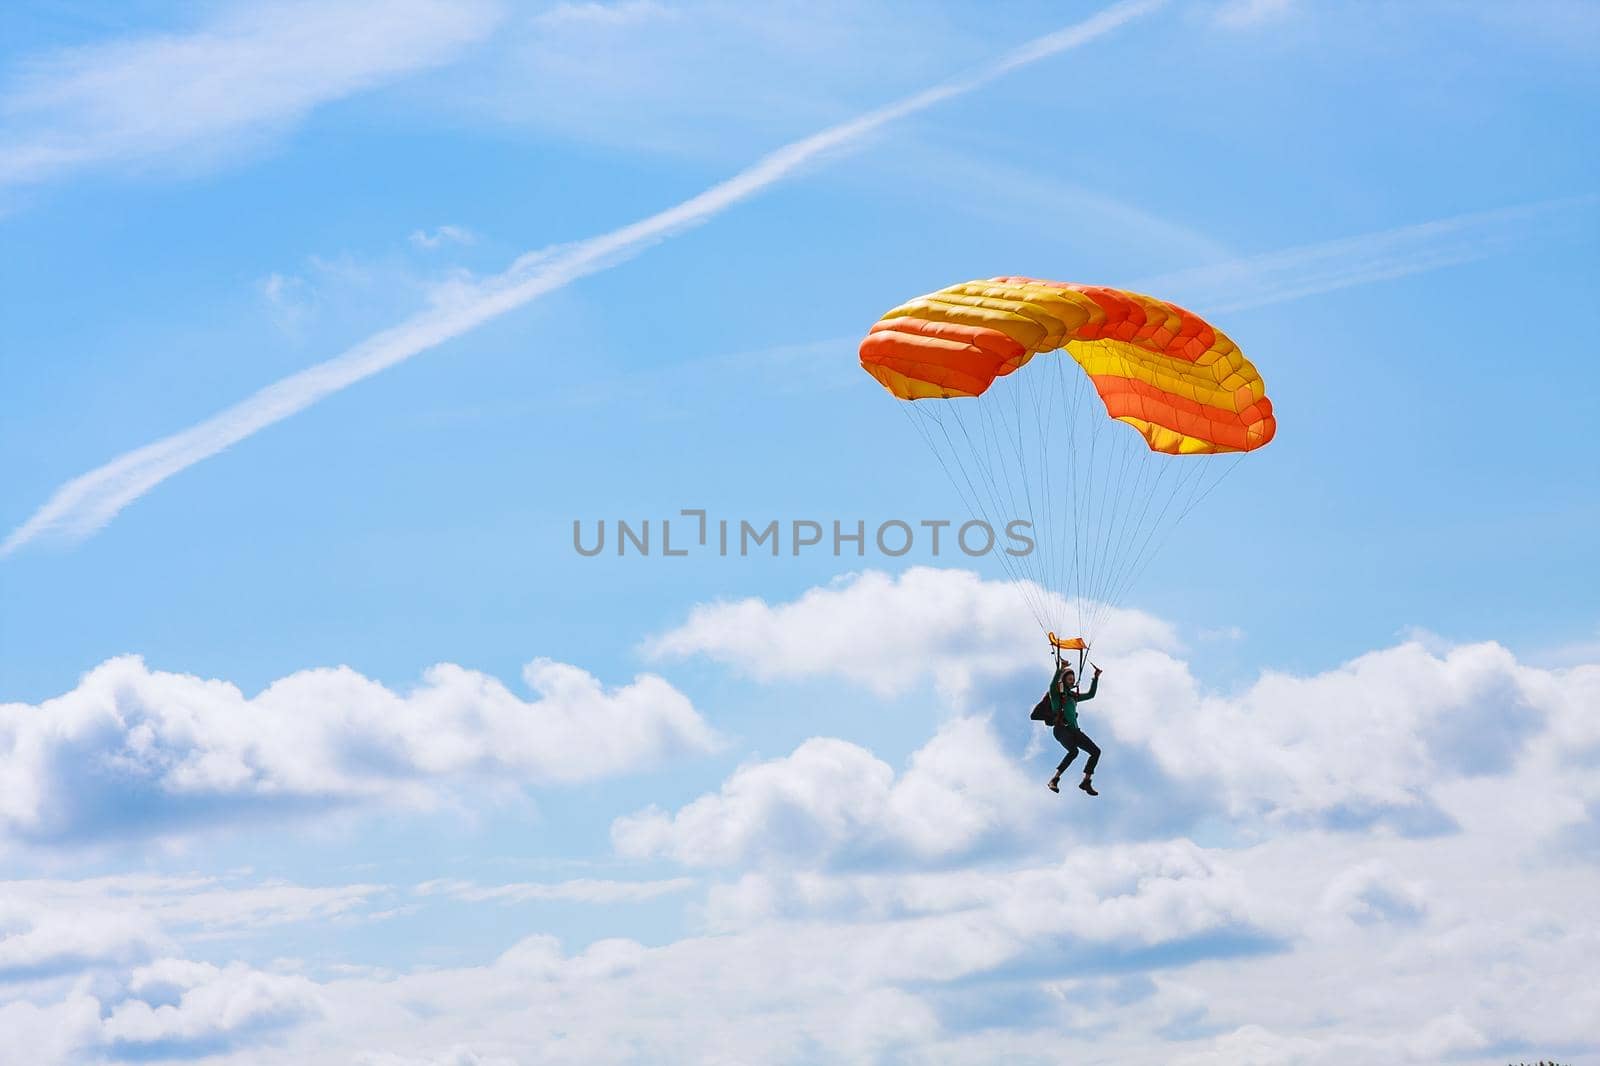 Skutech, Czech Republic, 6 August 2020: A parachutist with an orange parachute canopy against a background of blue sky and white clouds. Skydiving.